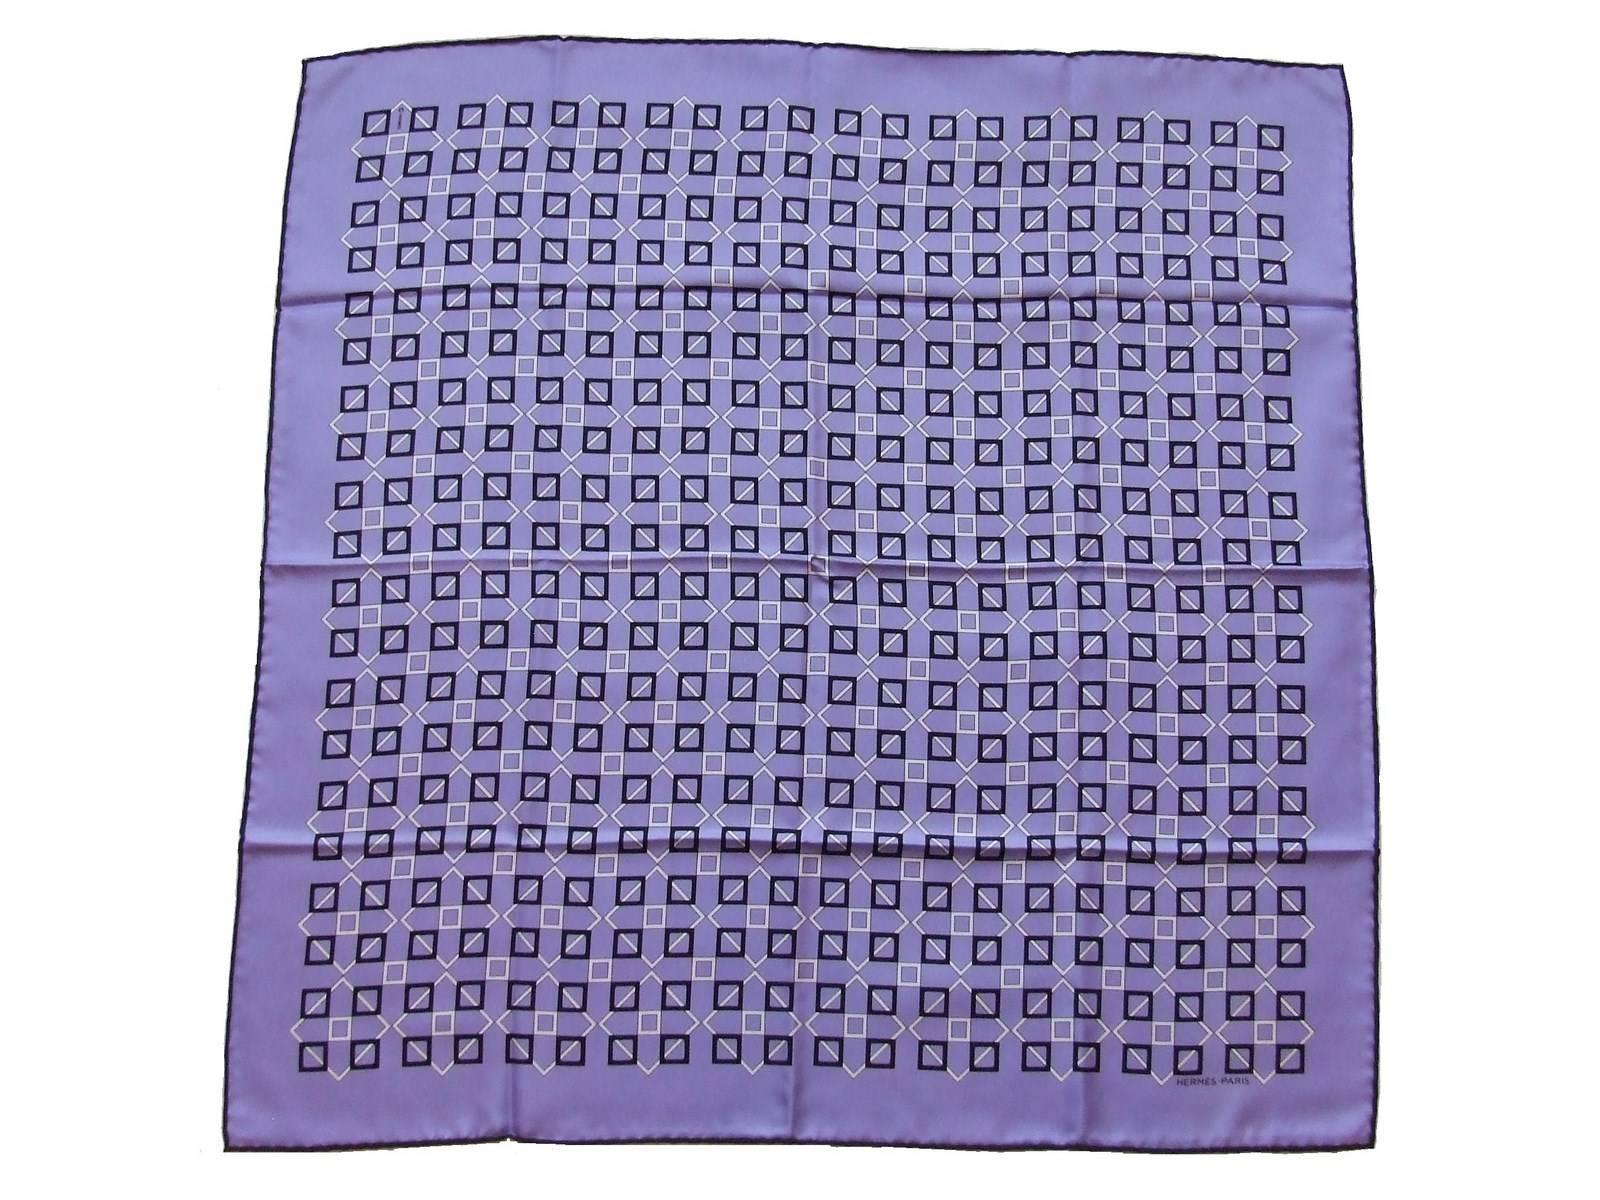 Beautiful Authentic Hermes Scarf

Geometric patterns (squares)

Made in France

Made of 100% Silk

Colorways: Purple background, White and Black squares

